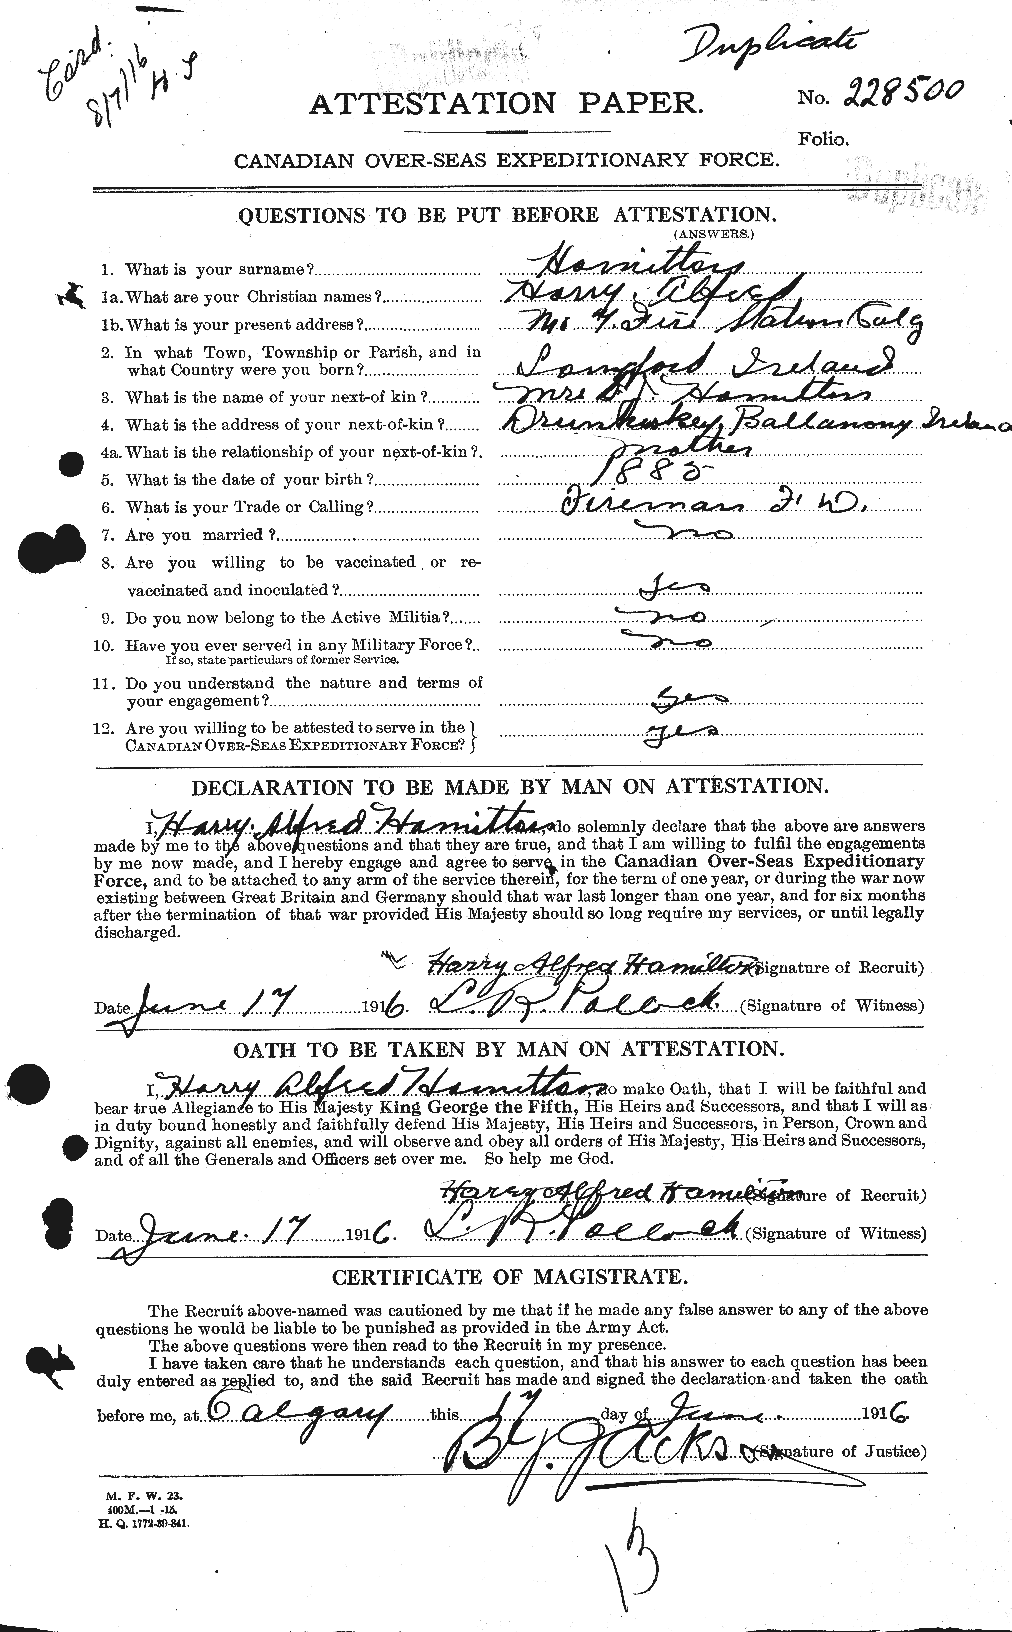 Personnel Records of the First World War - CEF 372508a